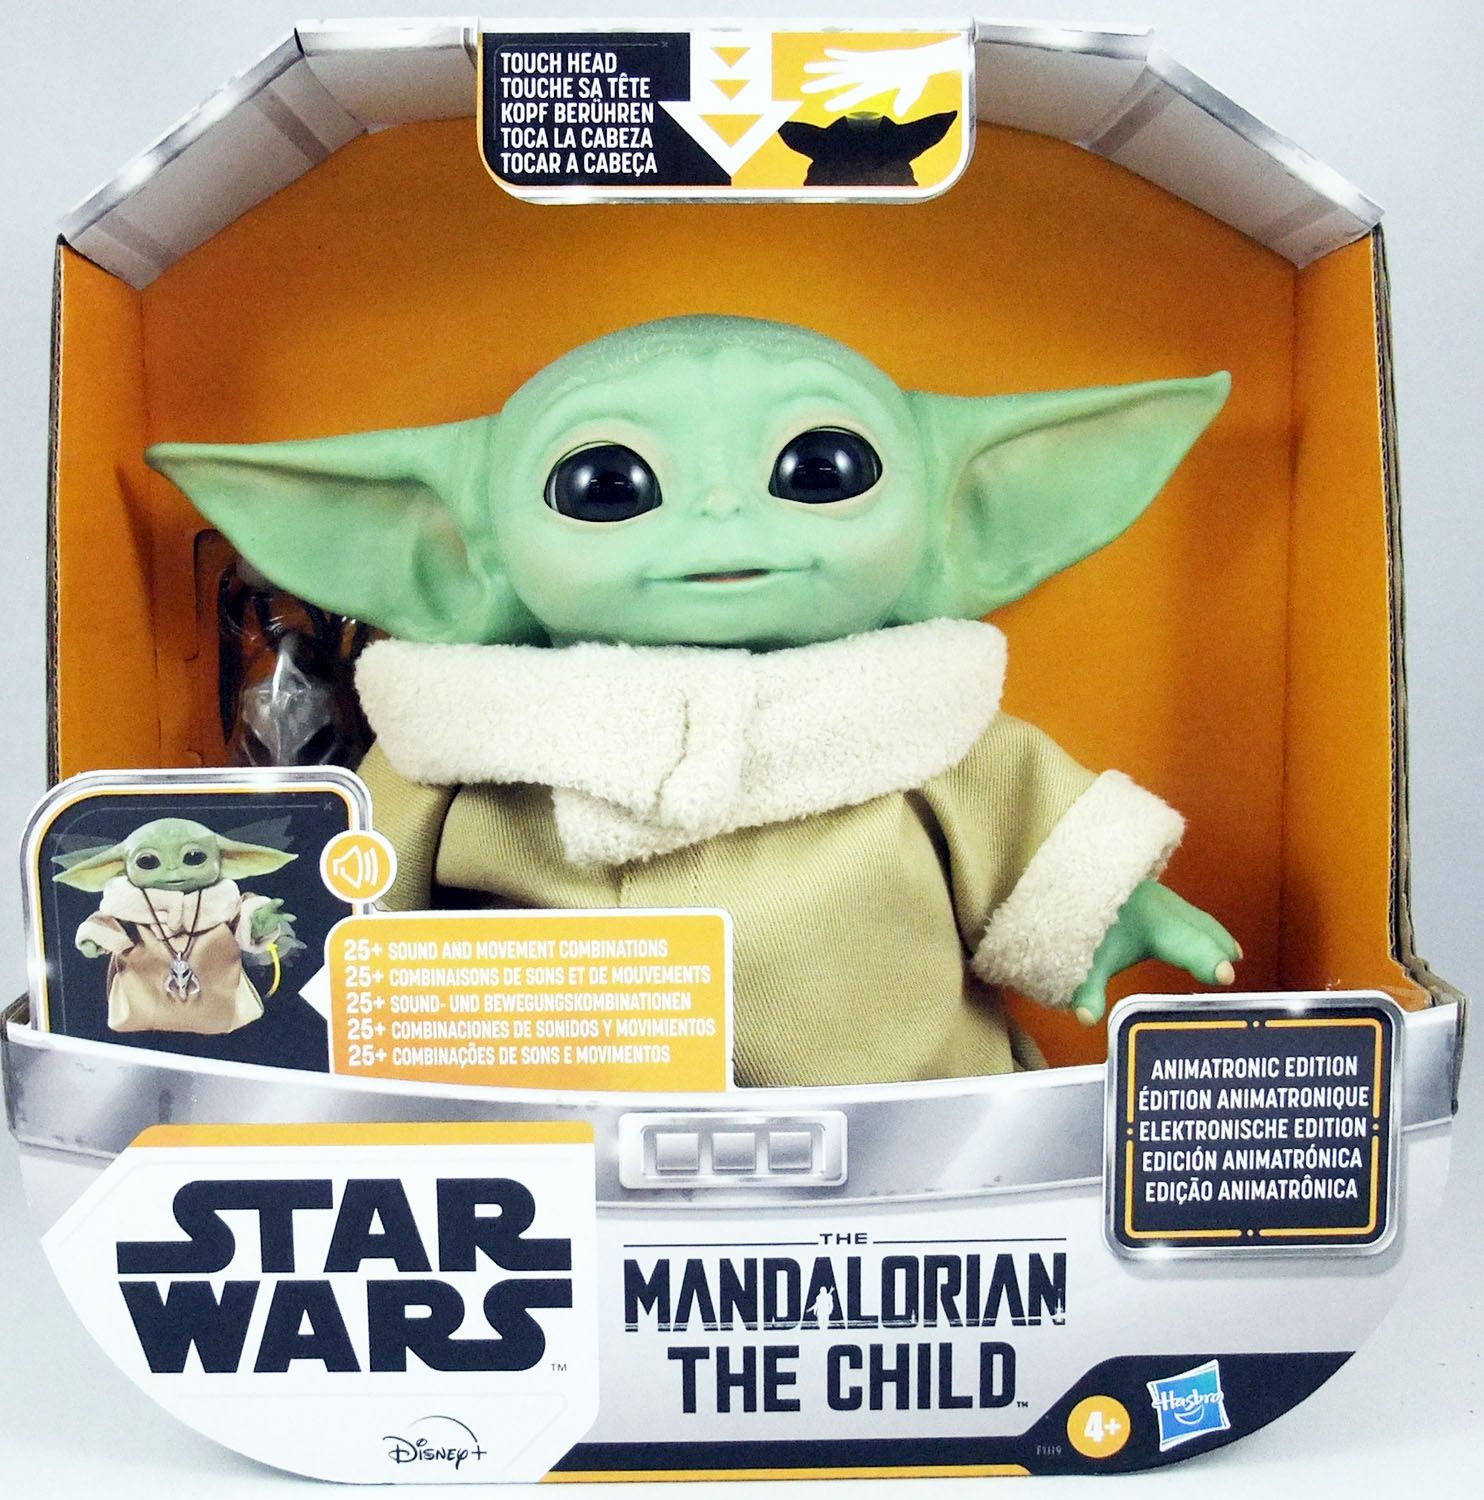 The Mandalorian Toy Official Star Wars Grogu The Child Animatronic Edition